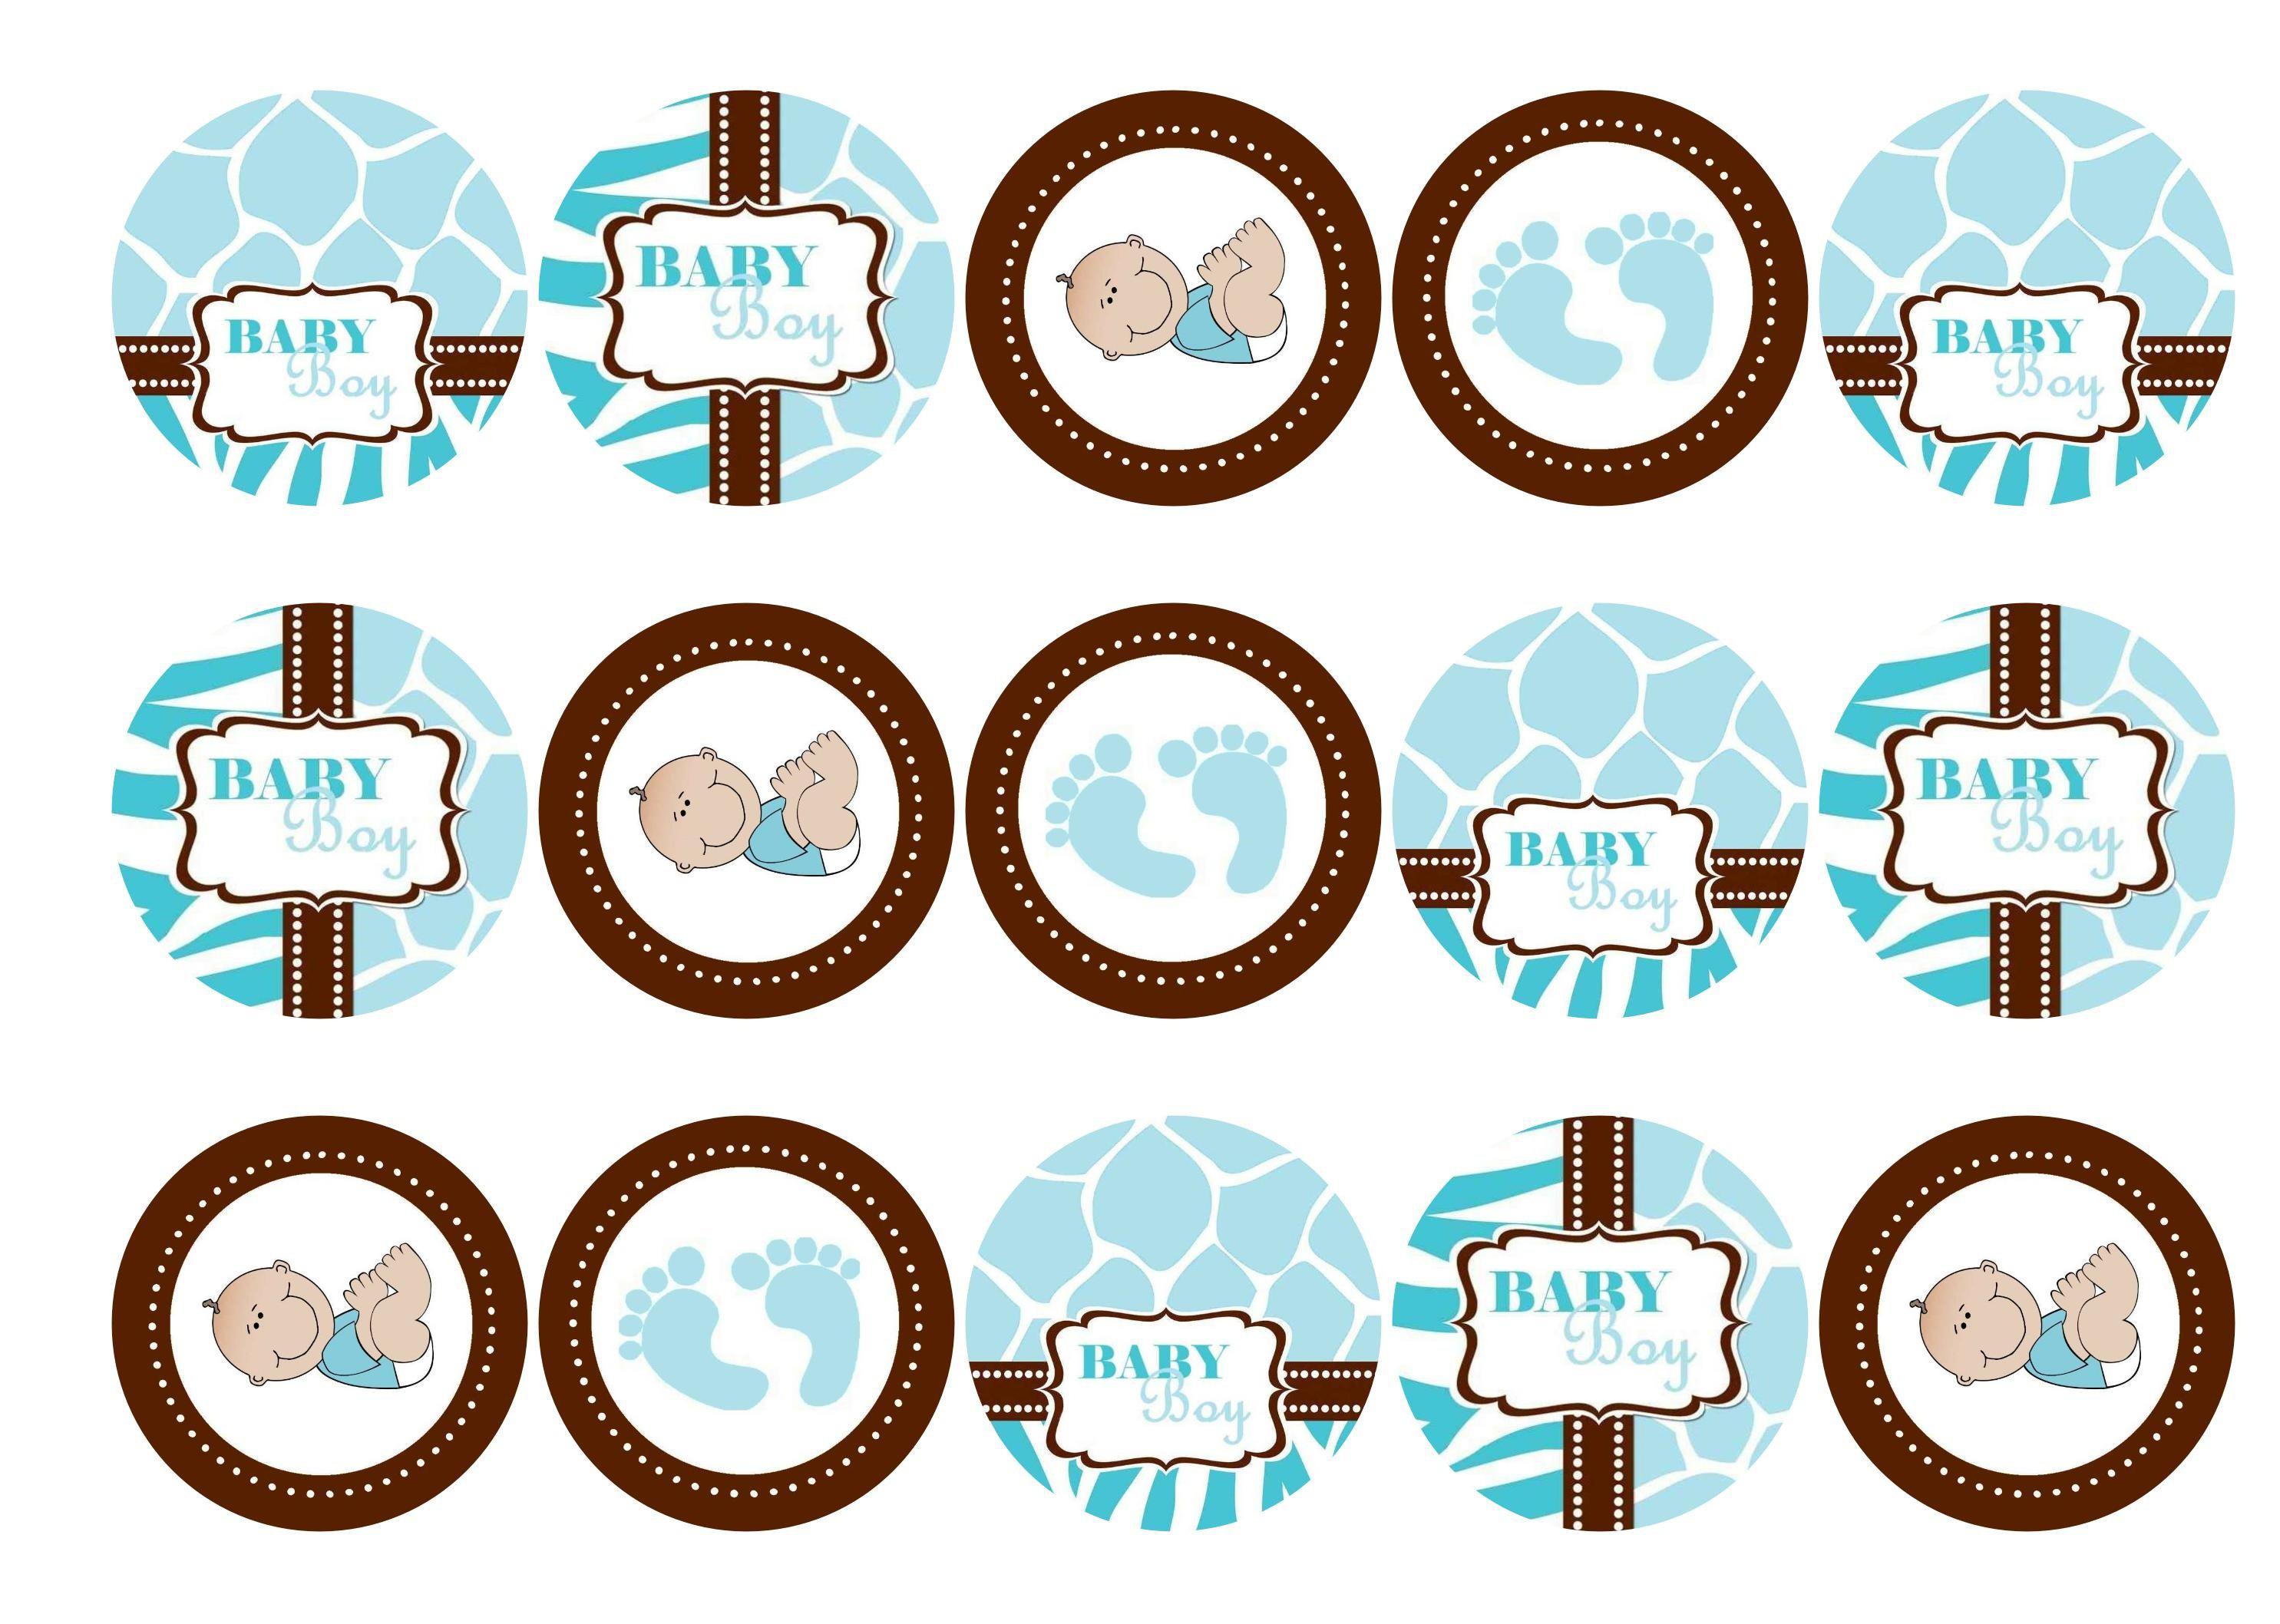 Printed edible cupcake toppers and cake toppers with baby boy images